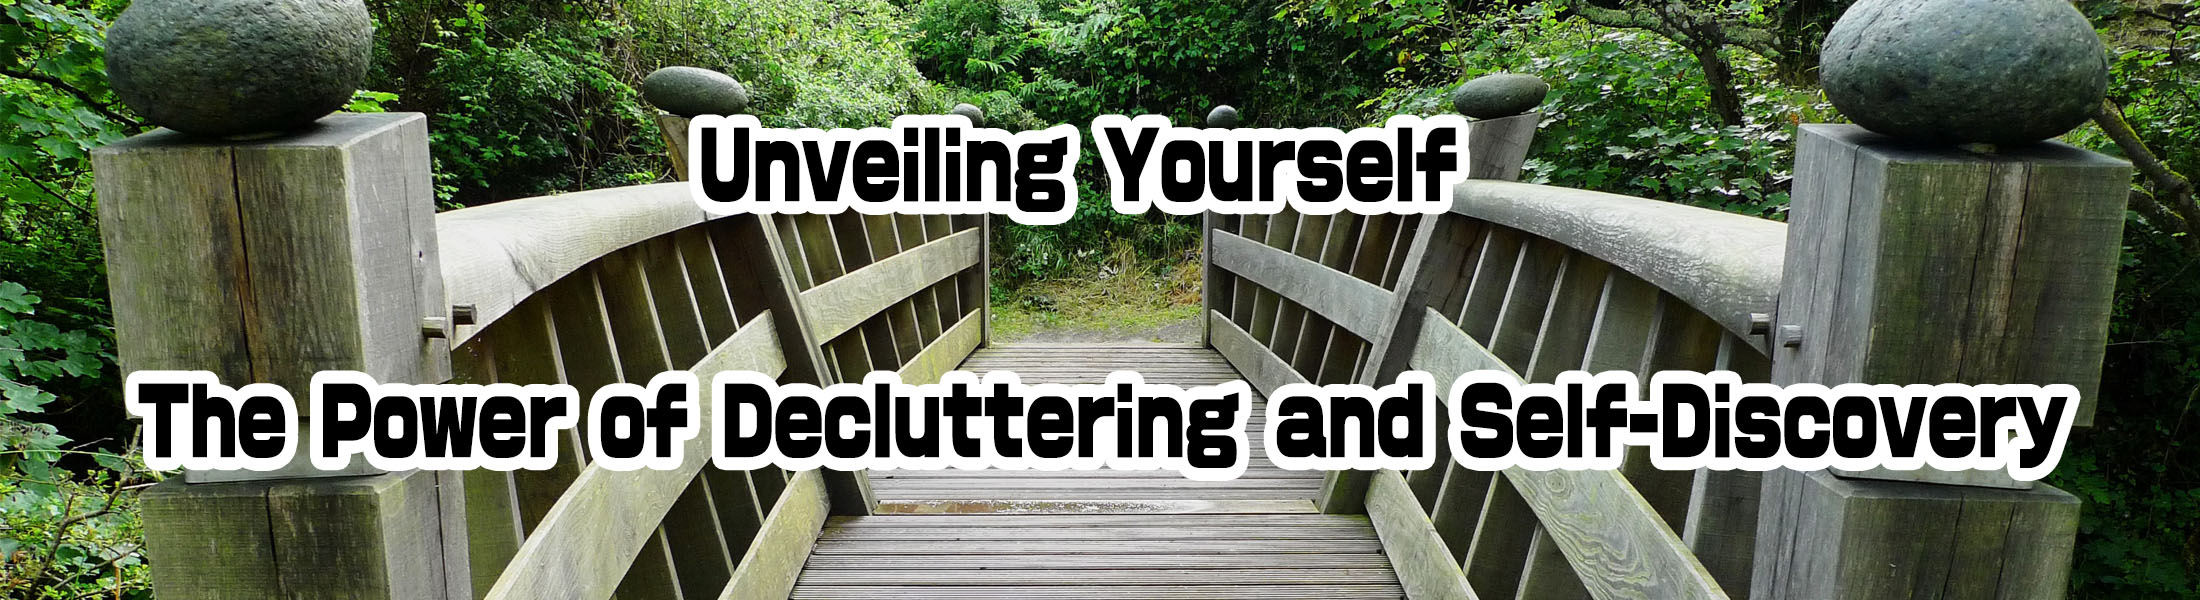 Unveiling Yourself: The Power of Decluttering and Self-Discovery